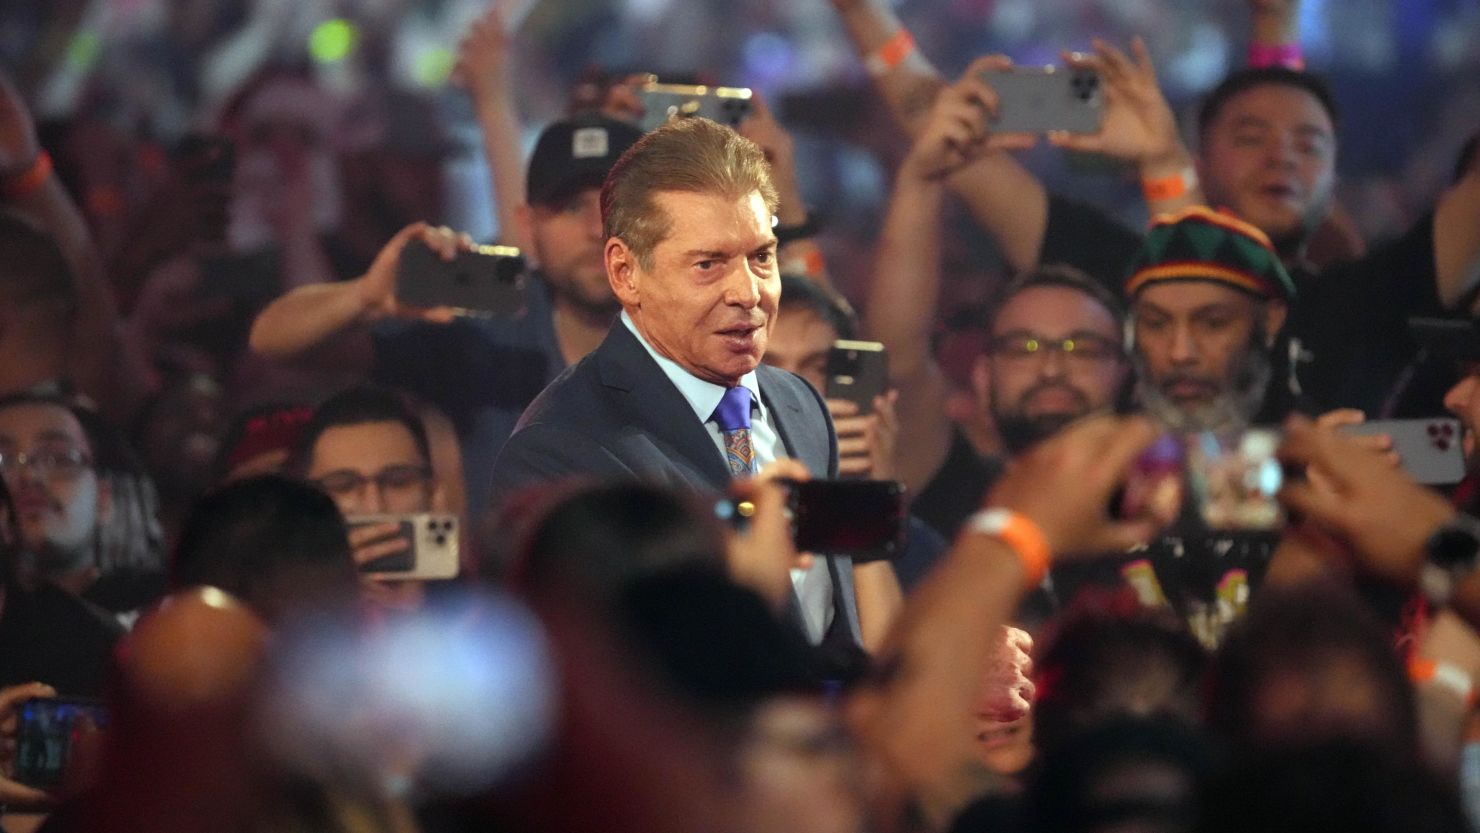 Vince McMahon enters the arena during WrestleMania at AT&T Stadium.